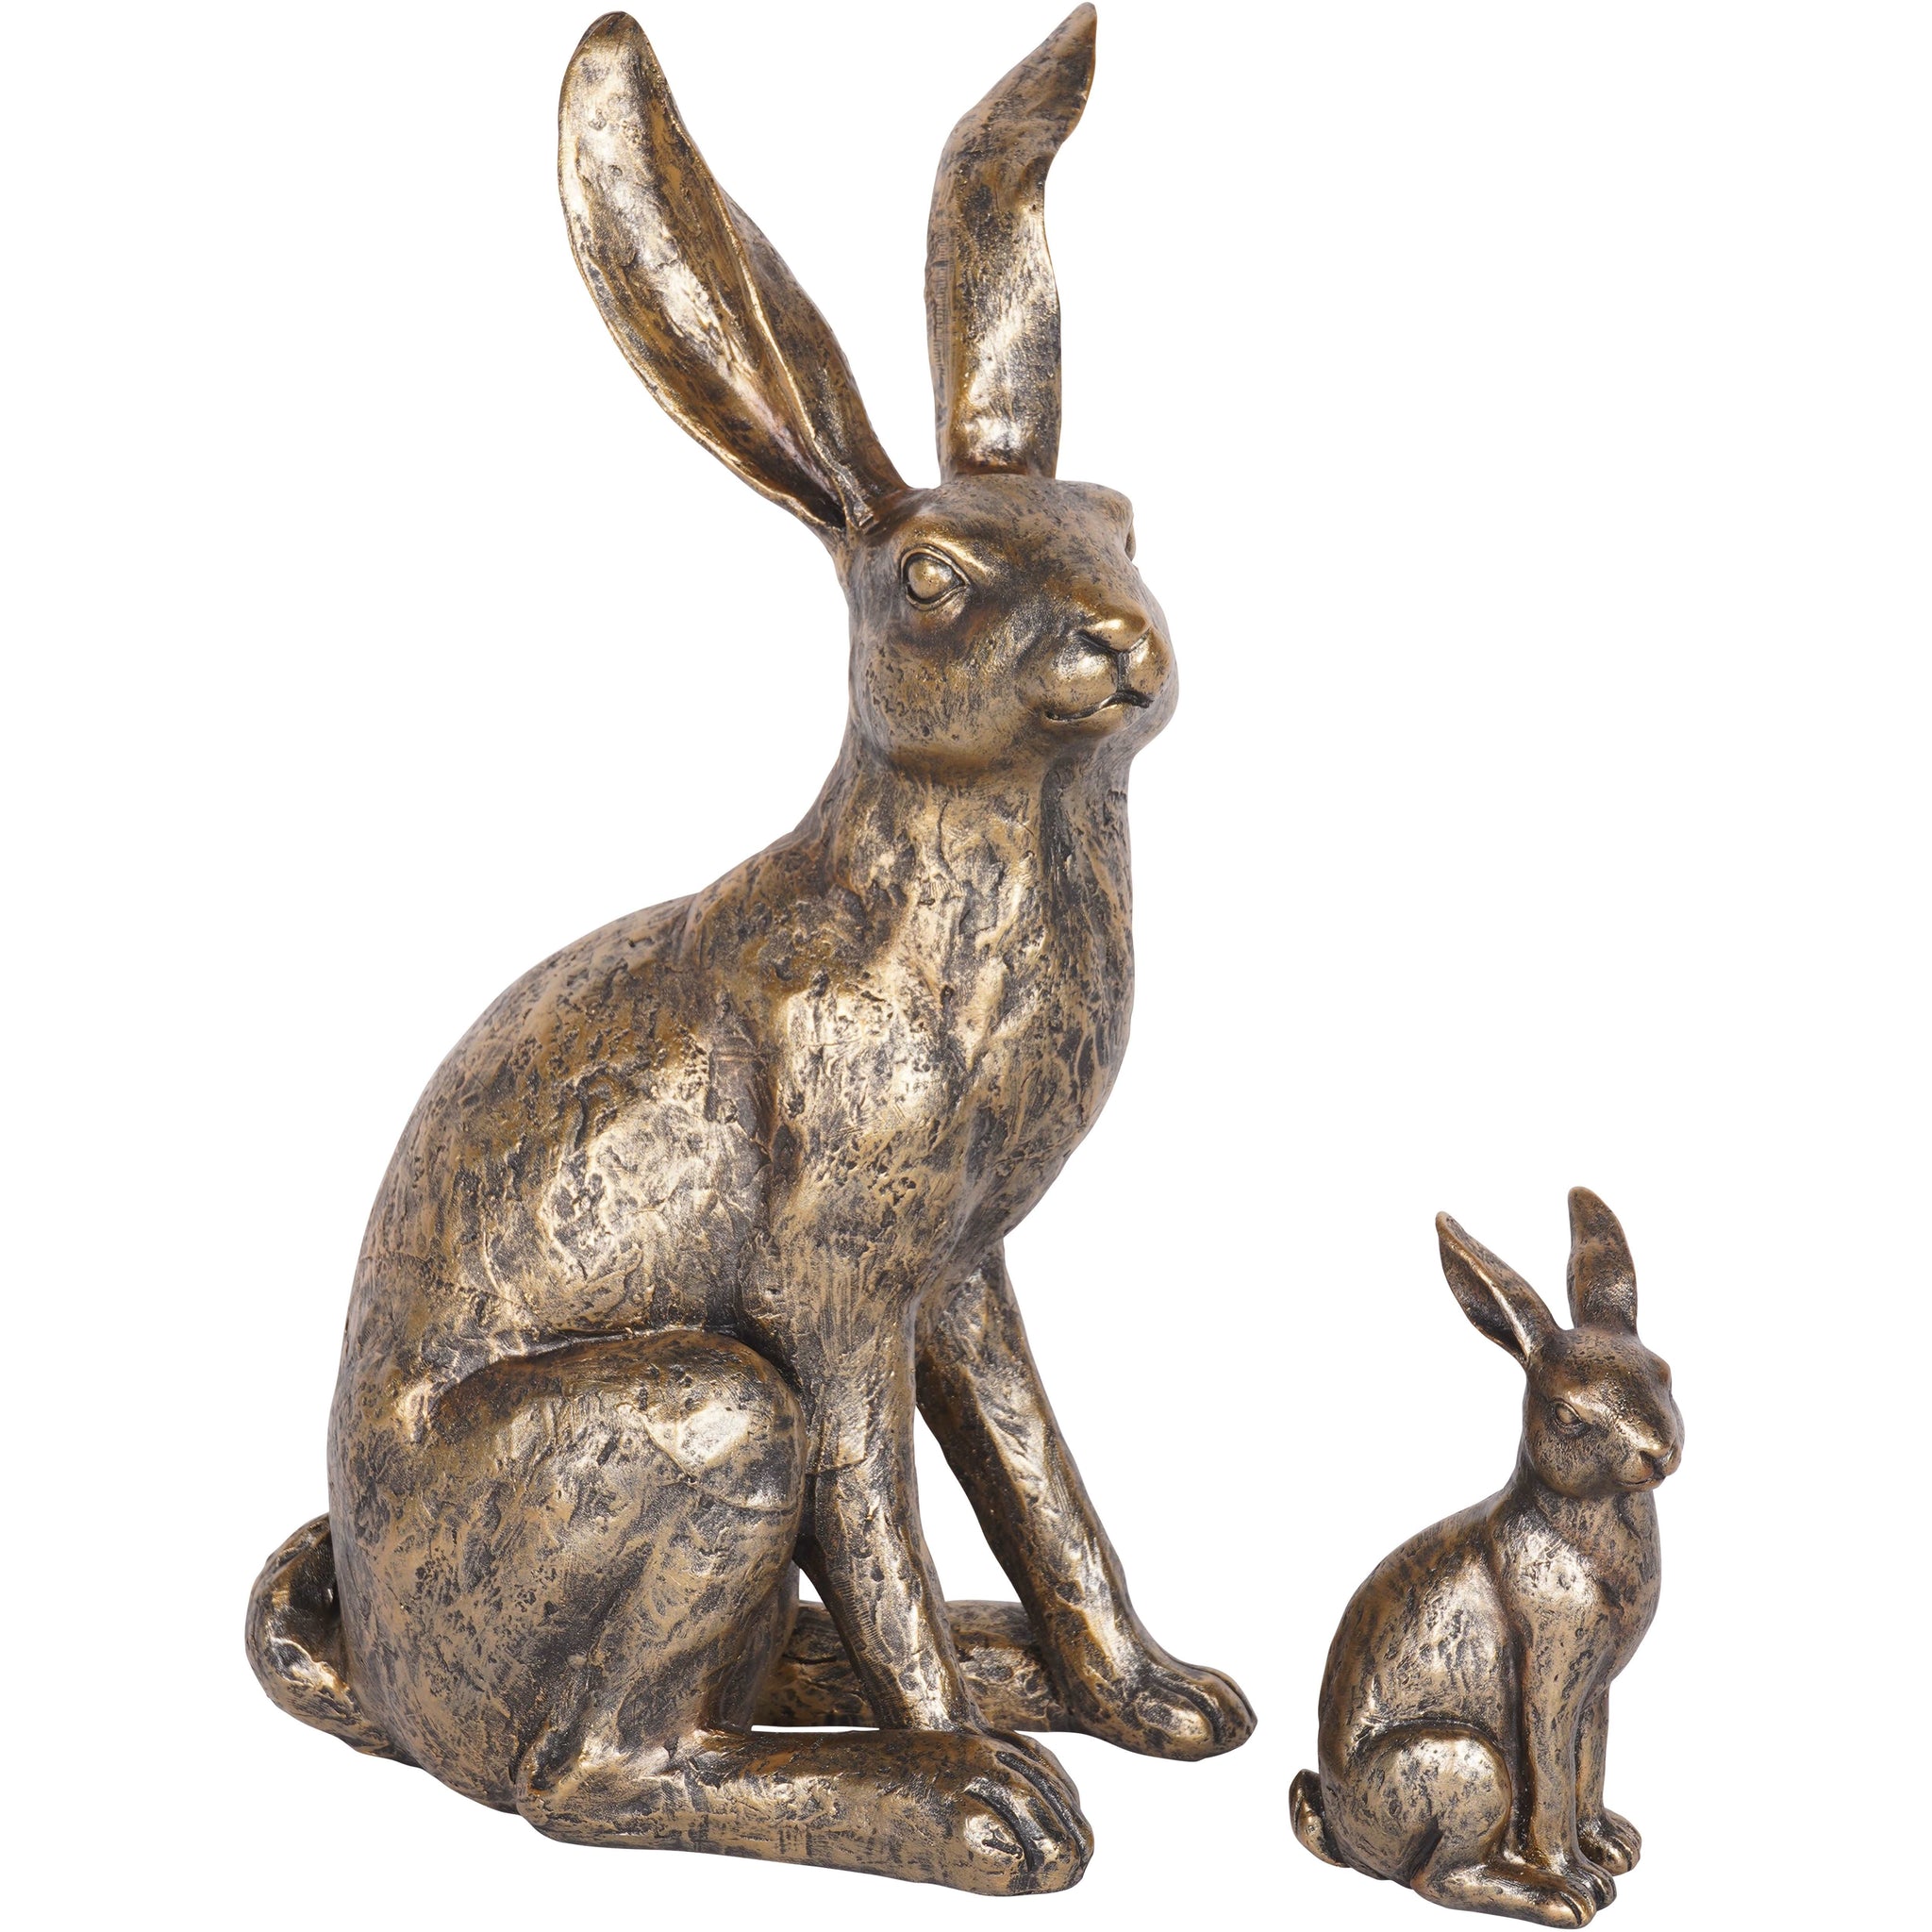 Antique Small Sitting Hare Sculpture